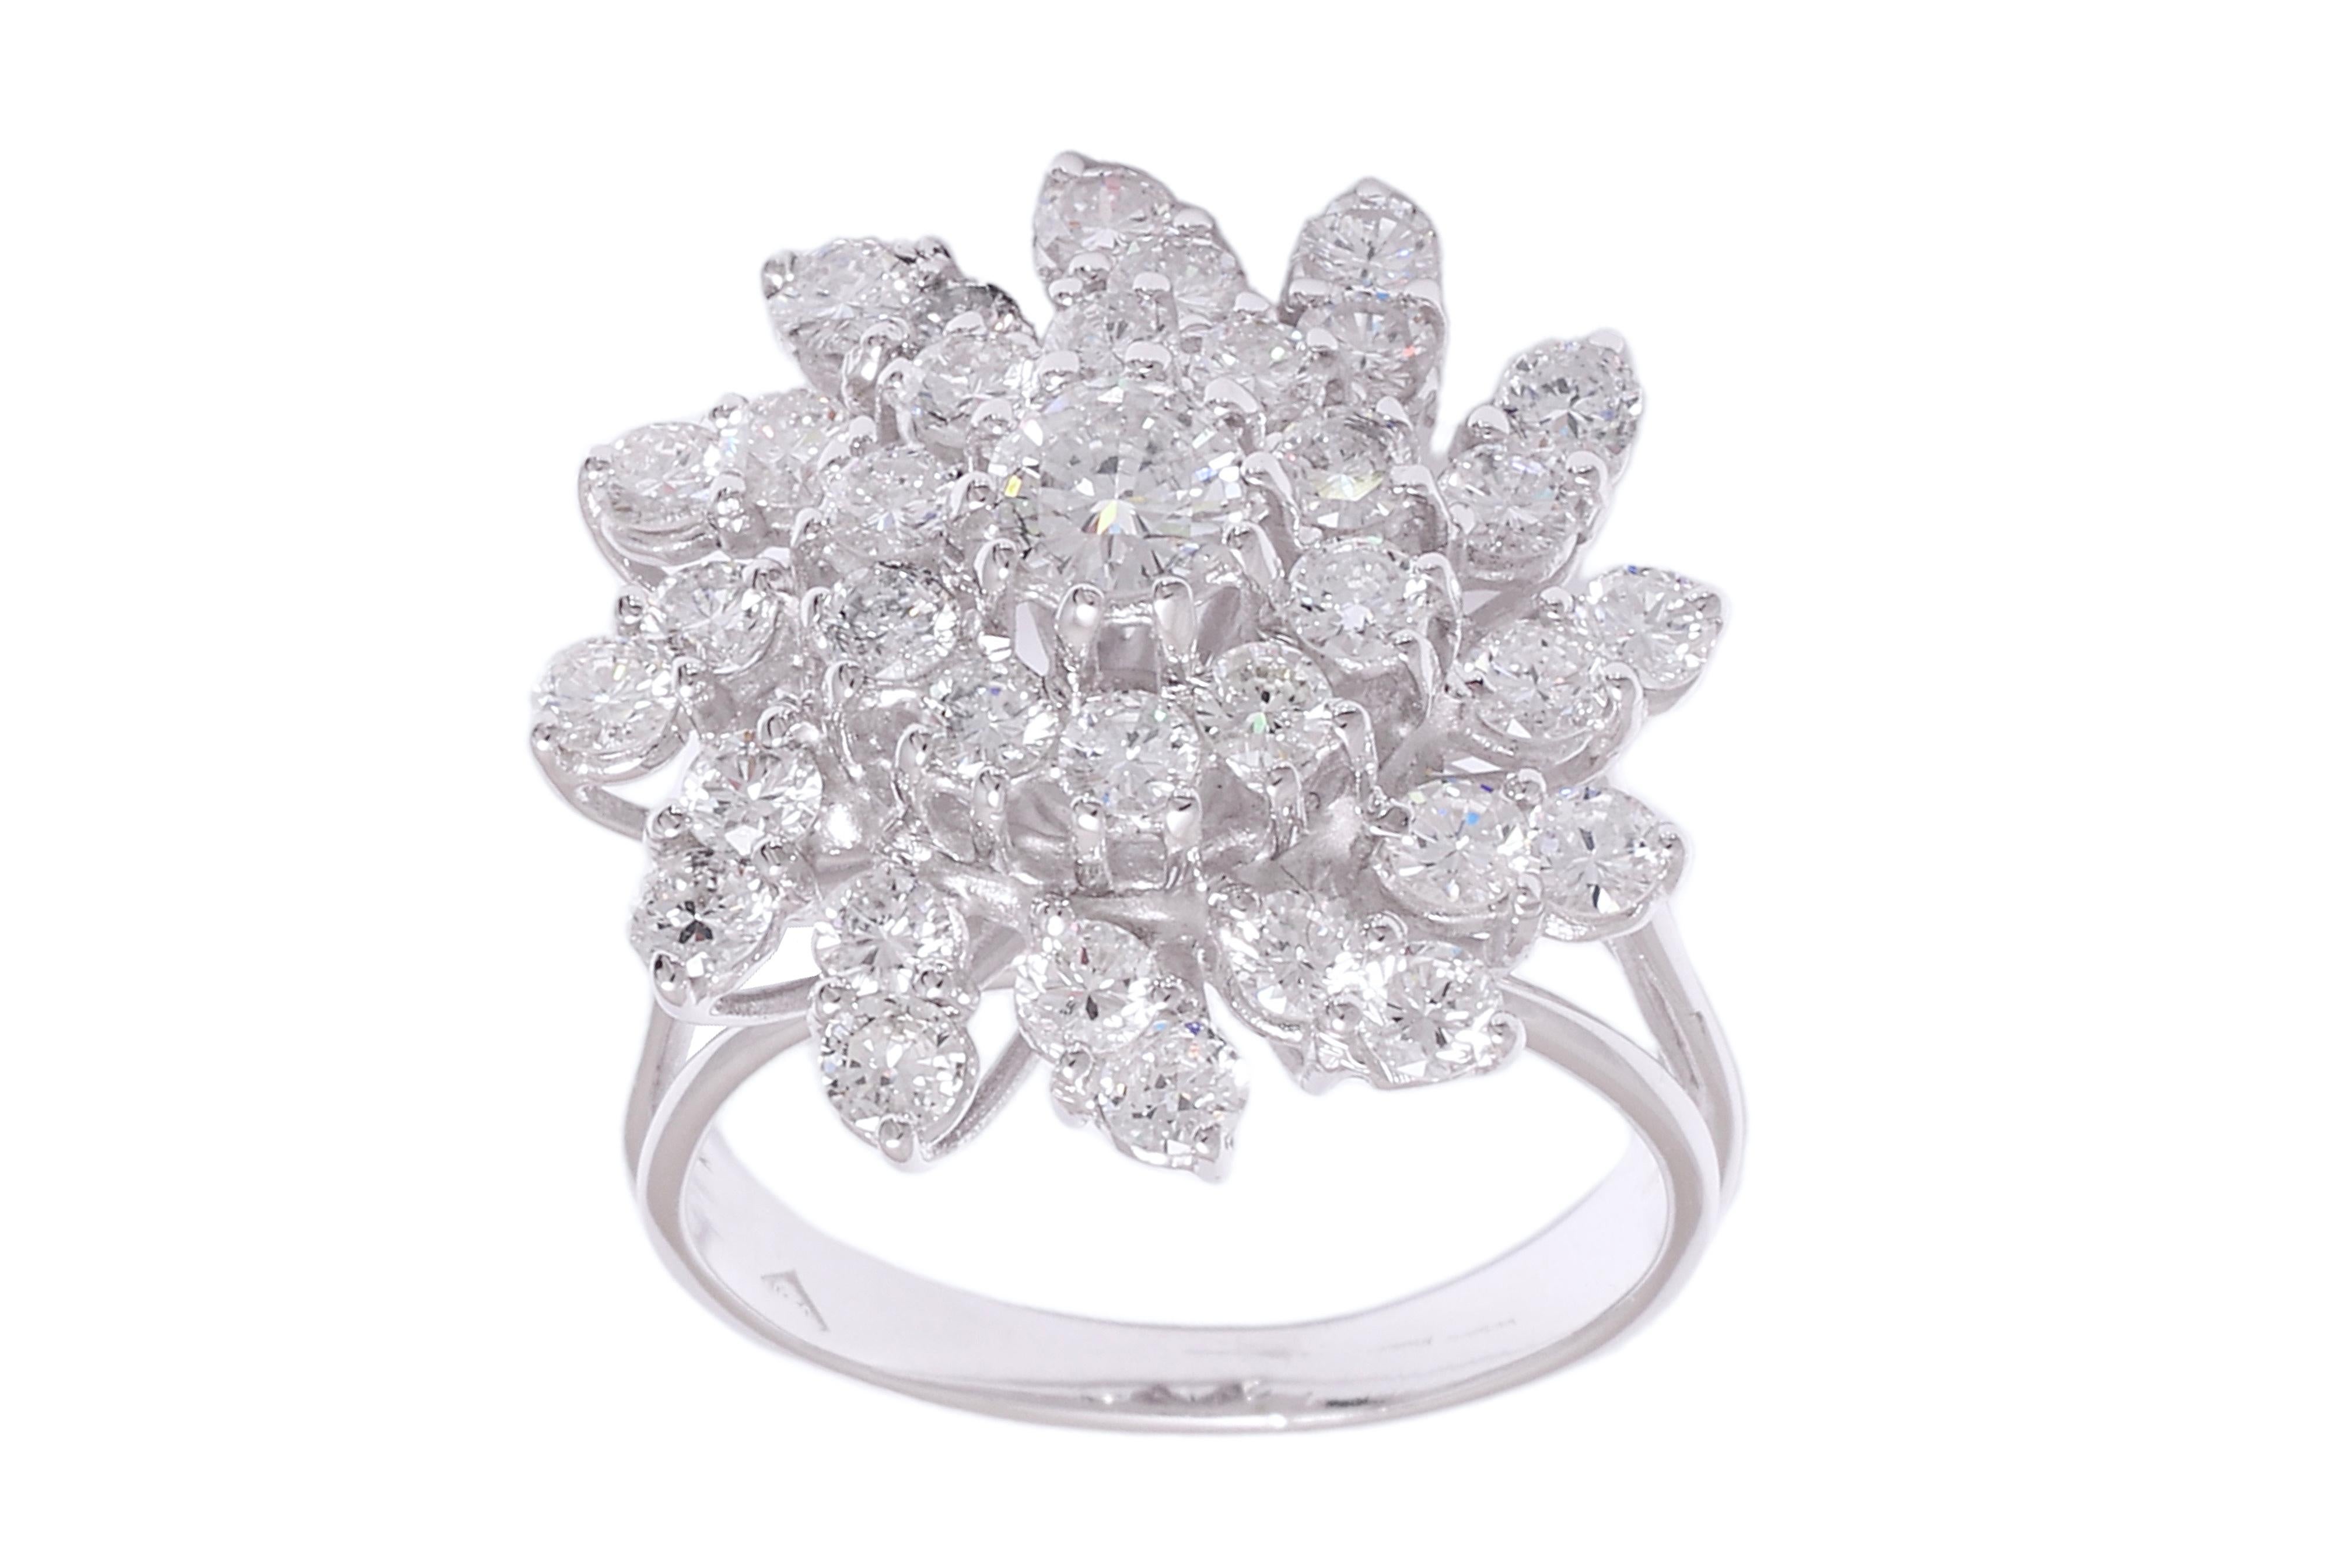 Magnificant 18 kt. White Gold Flower Ring With 2.85 ct. Diamonds 

Diamonds: brilliant cut diamonds, together  2.85 ct.

Material: 18 kt. white gold

Ring size: 53 EU / 6.5 US ( ring size can be changed for free ) 

Total weight: 7.8 grams  / 5 dwt